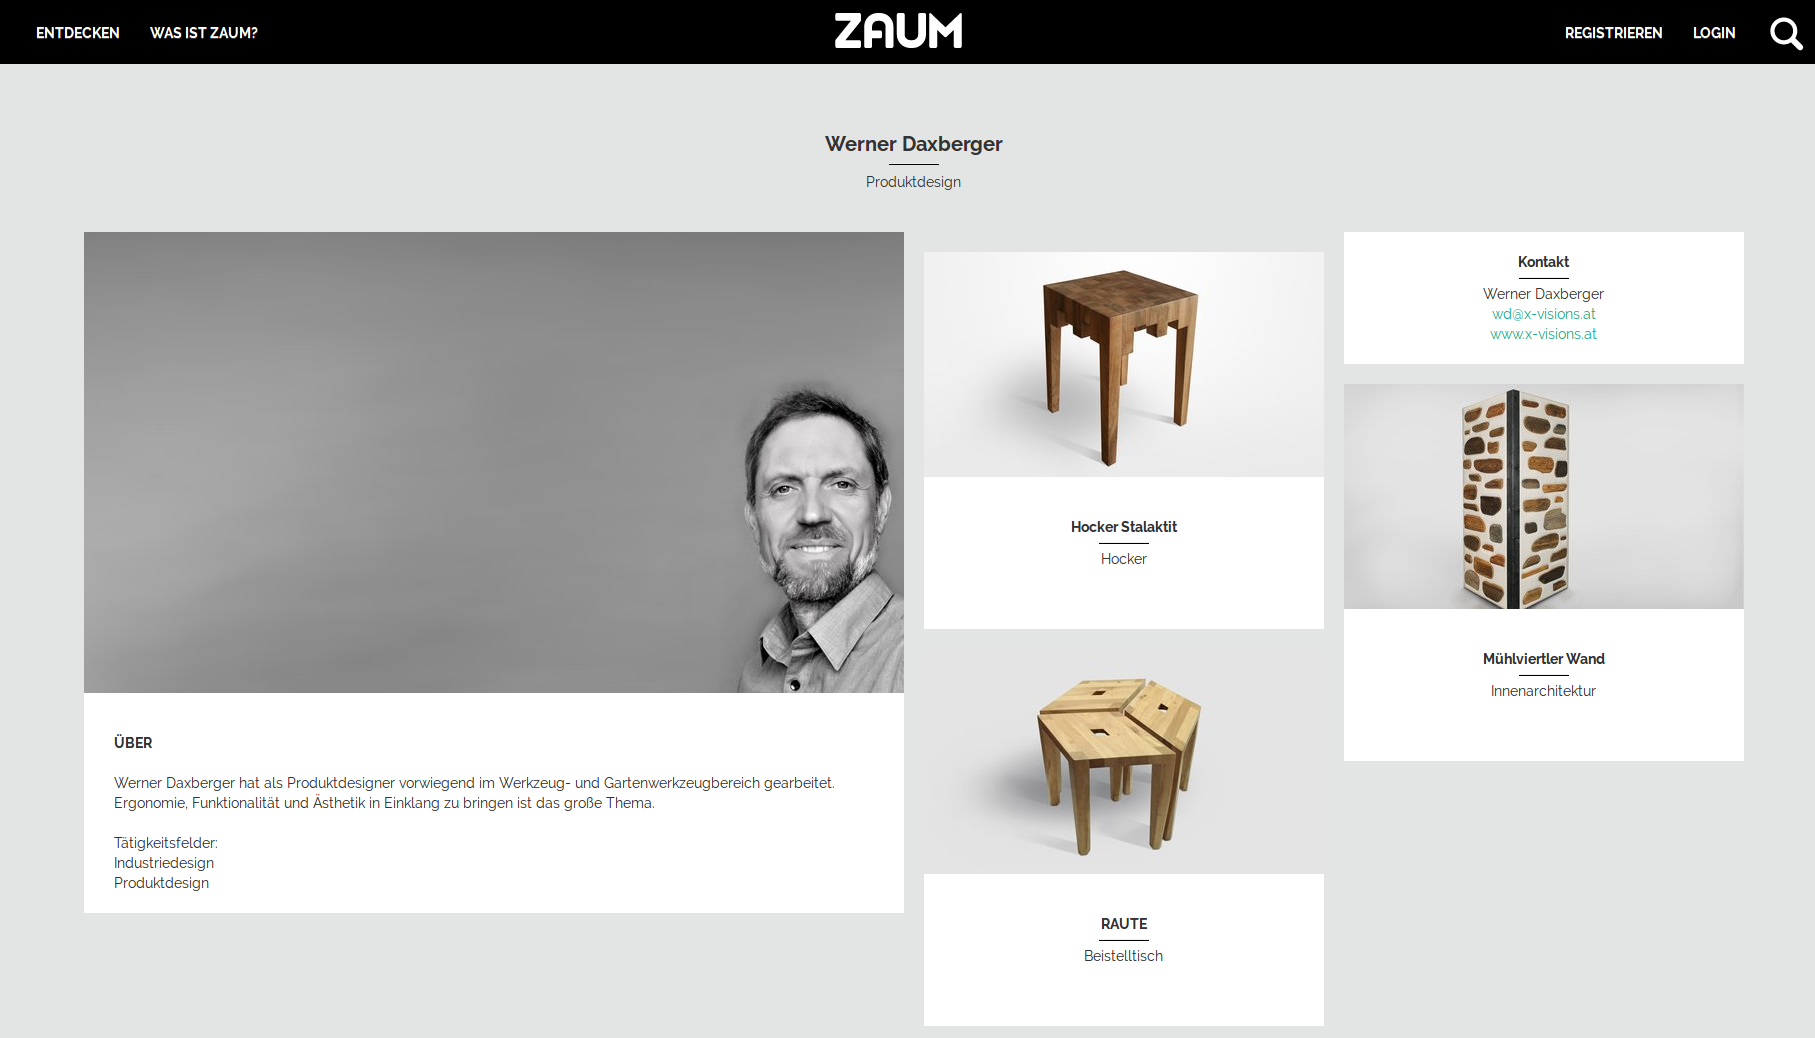 ZAUM online platform for presentation of products and ideas